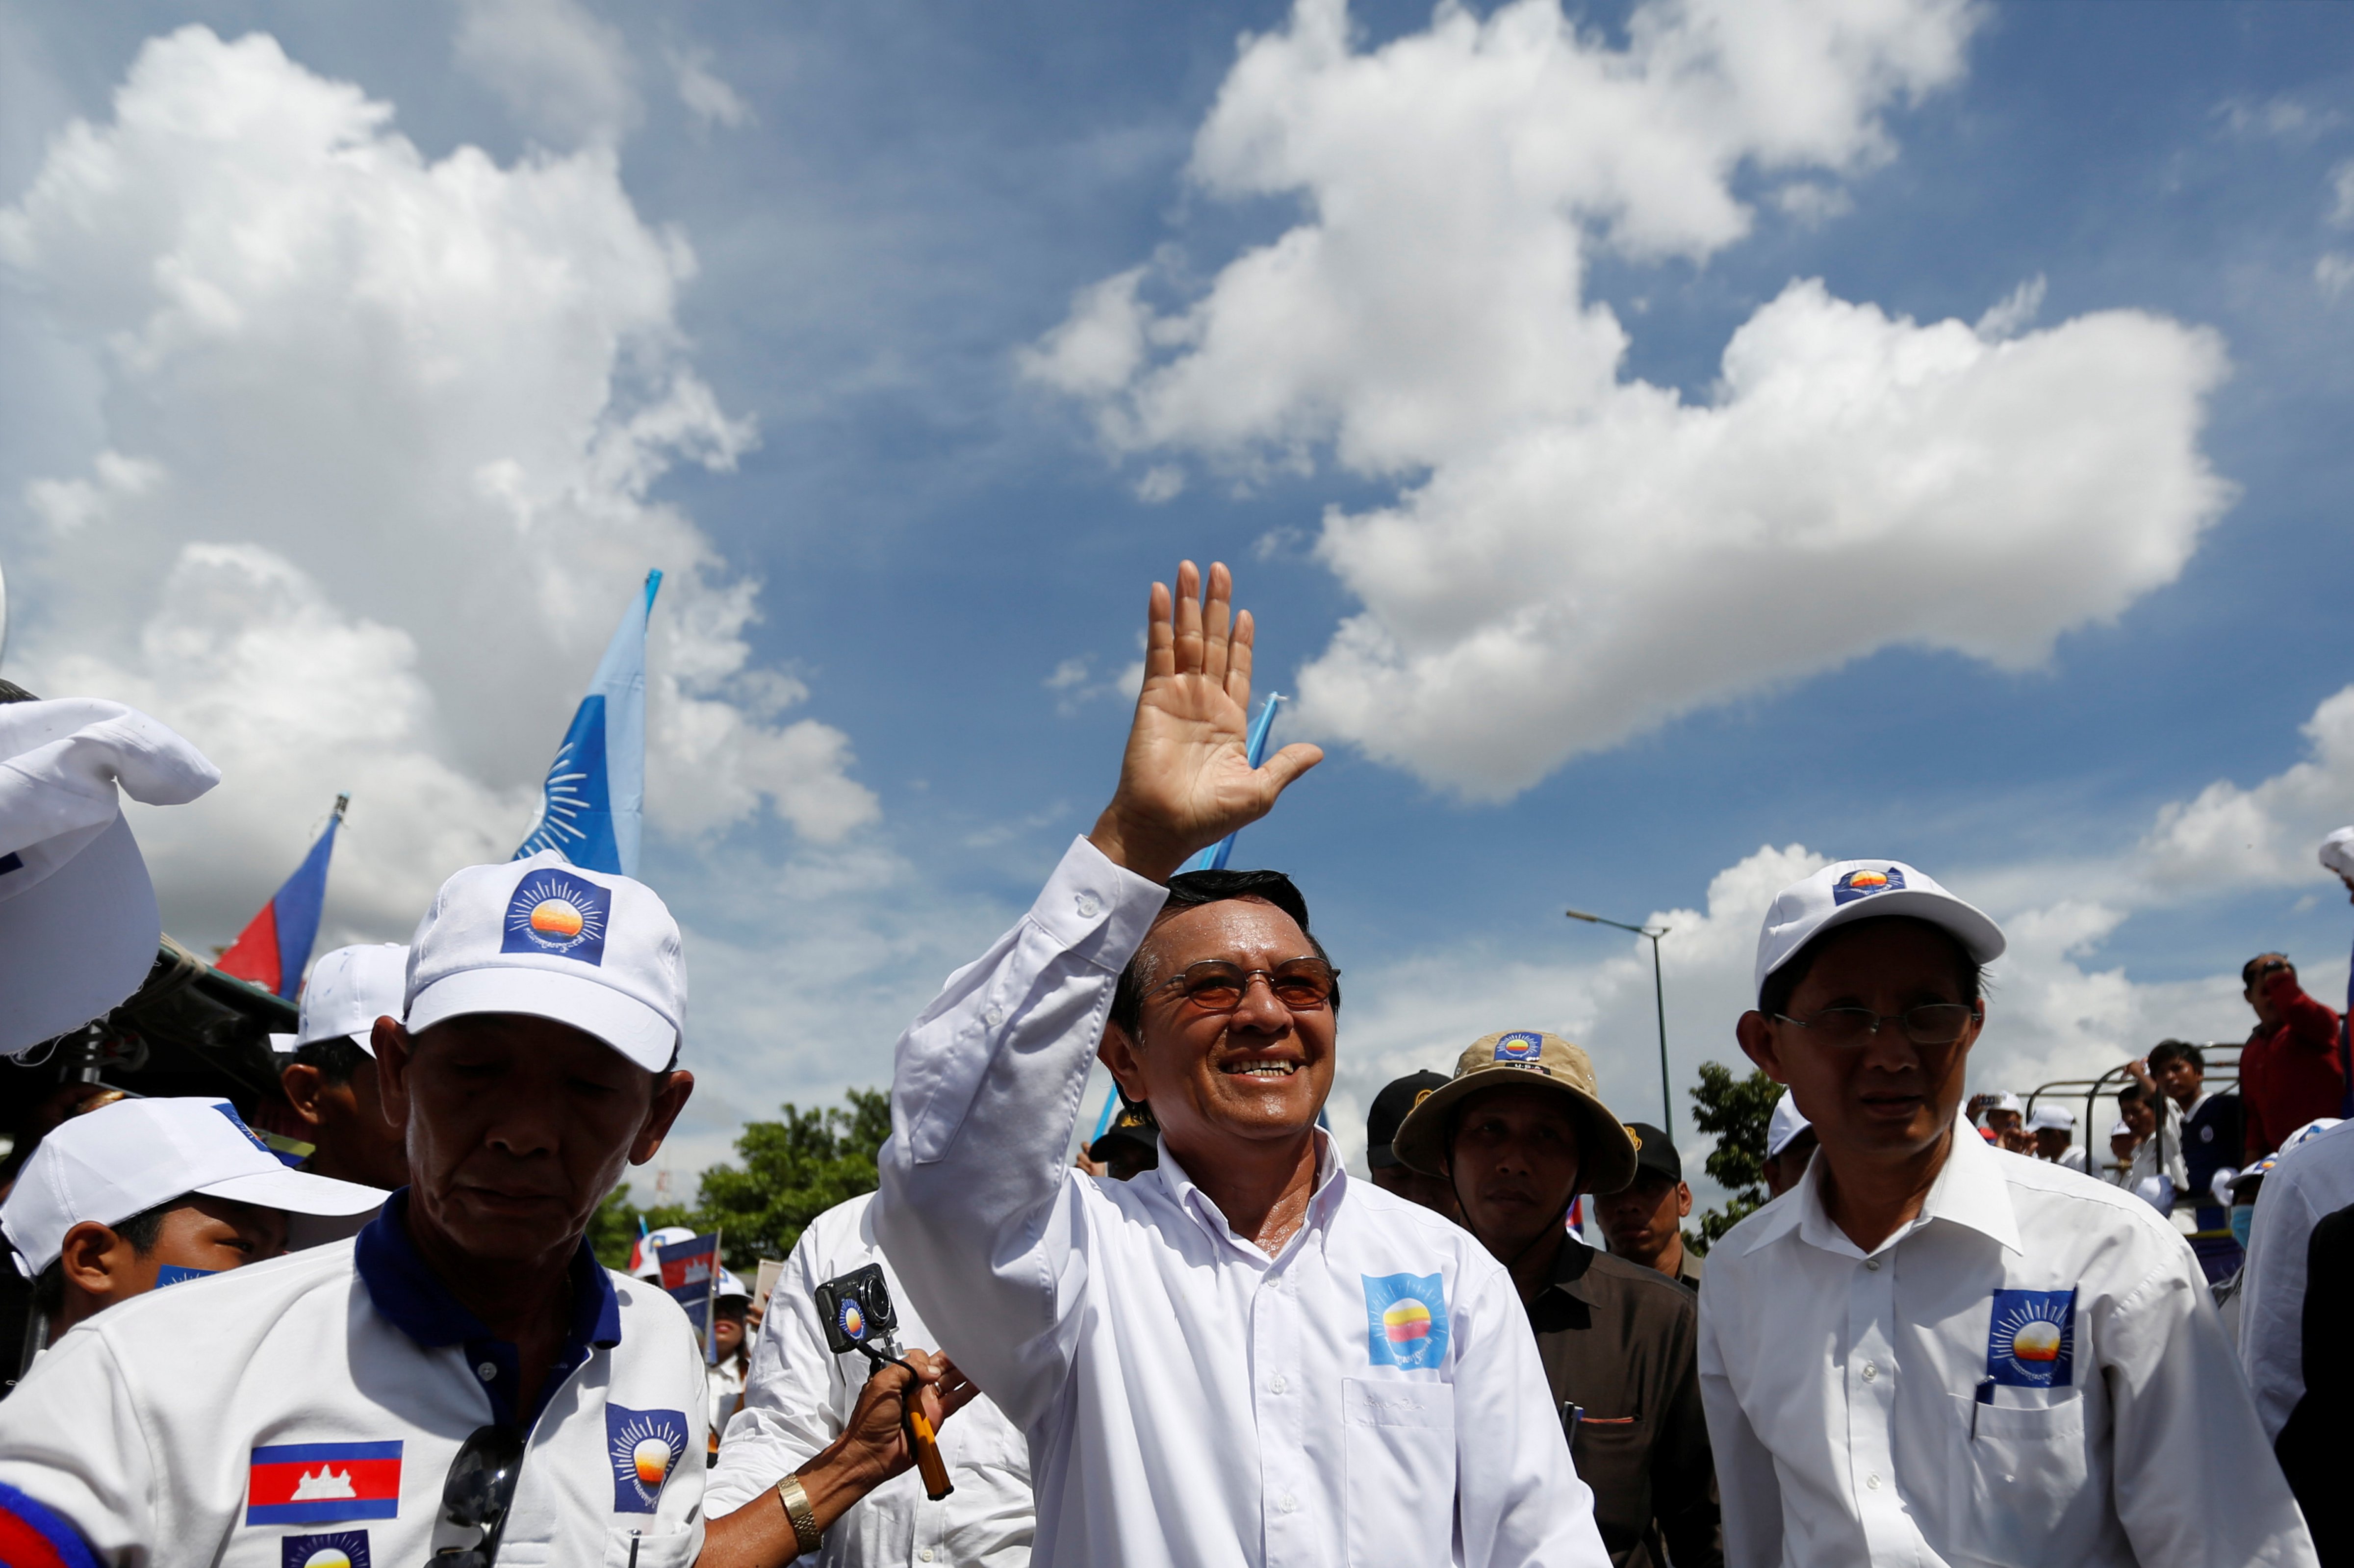 President of the opposition Cambodia National Rescue Party Kem Sokha arrives at a campaign rally in Phnom Penh